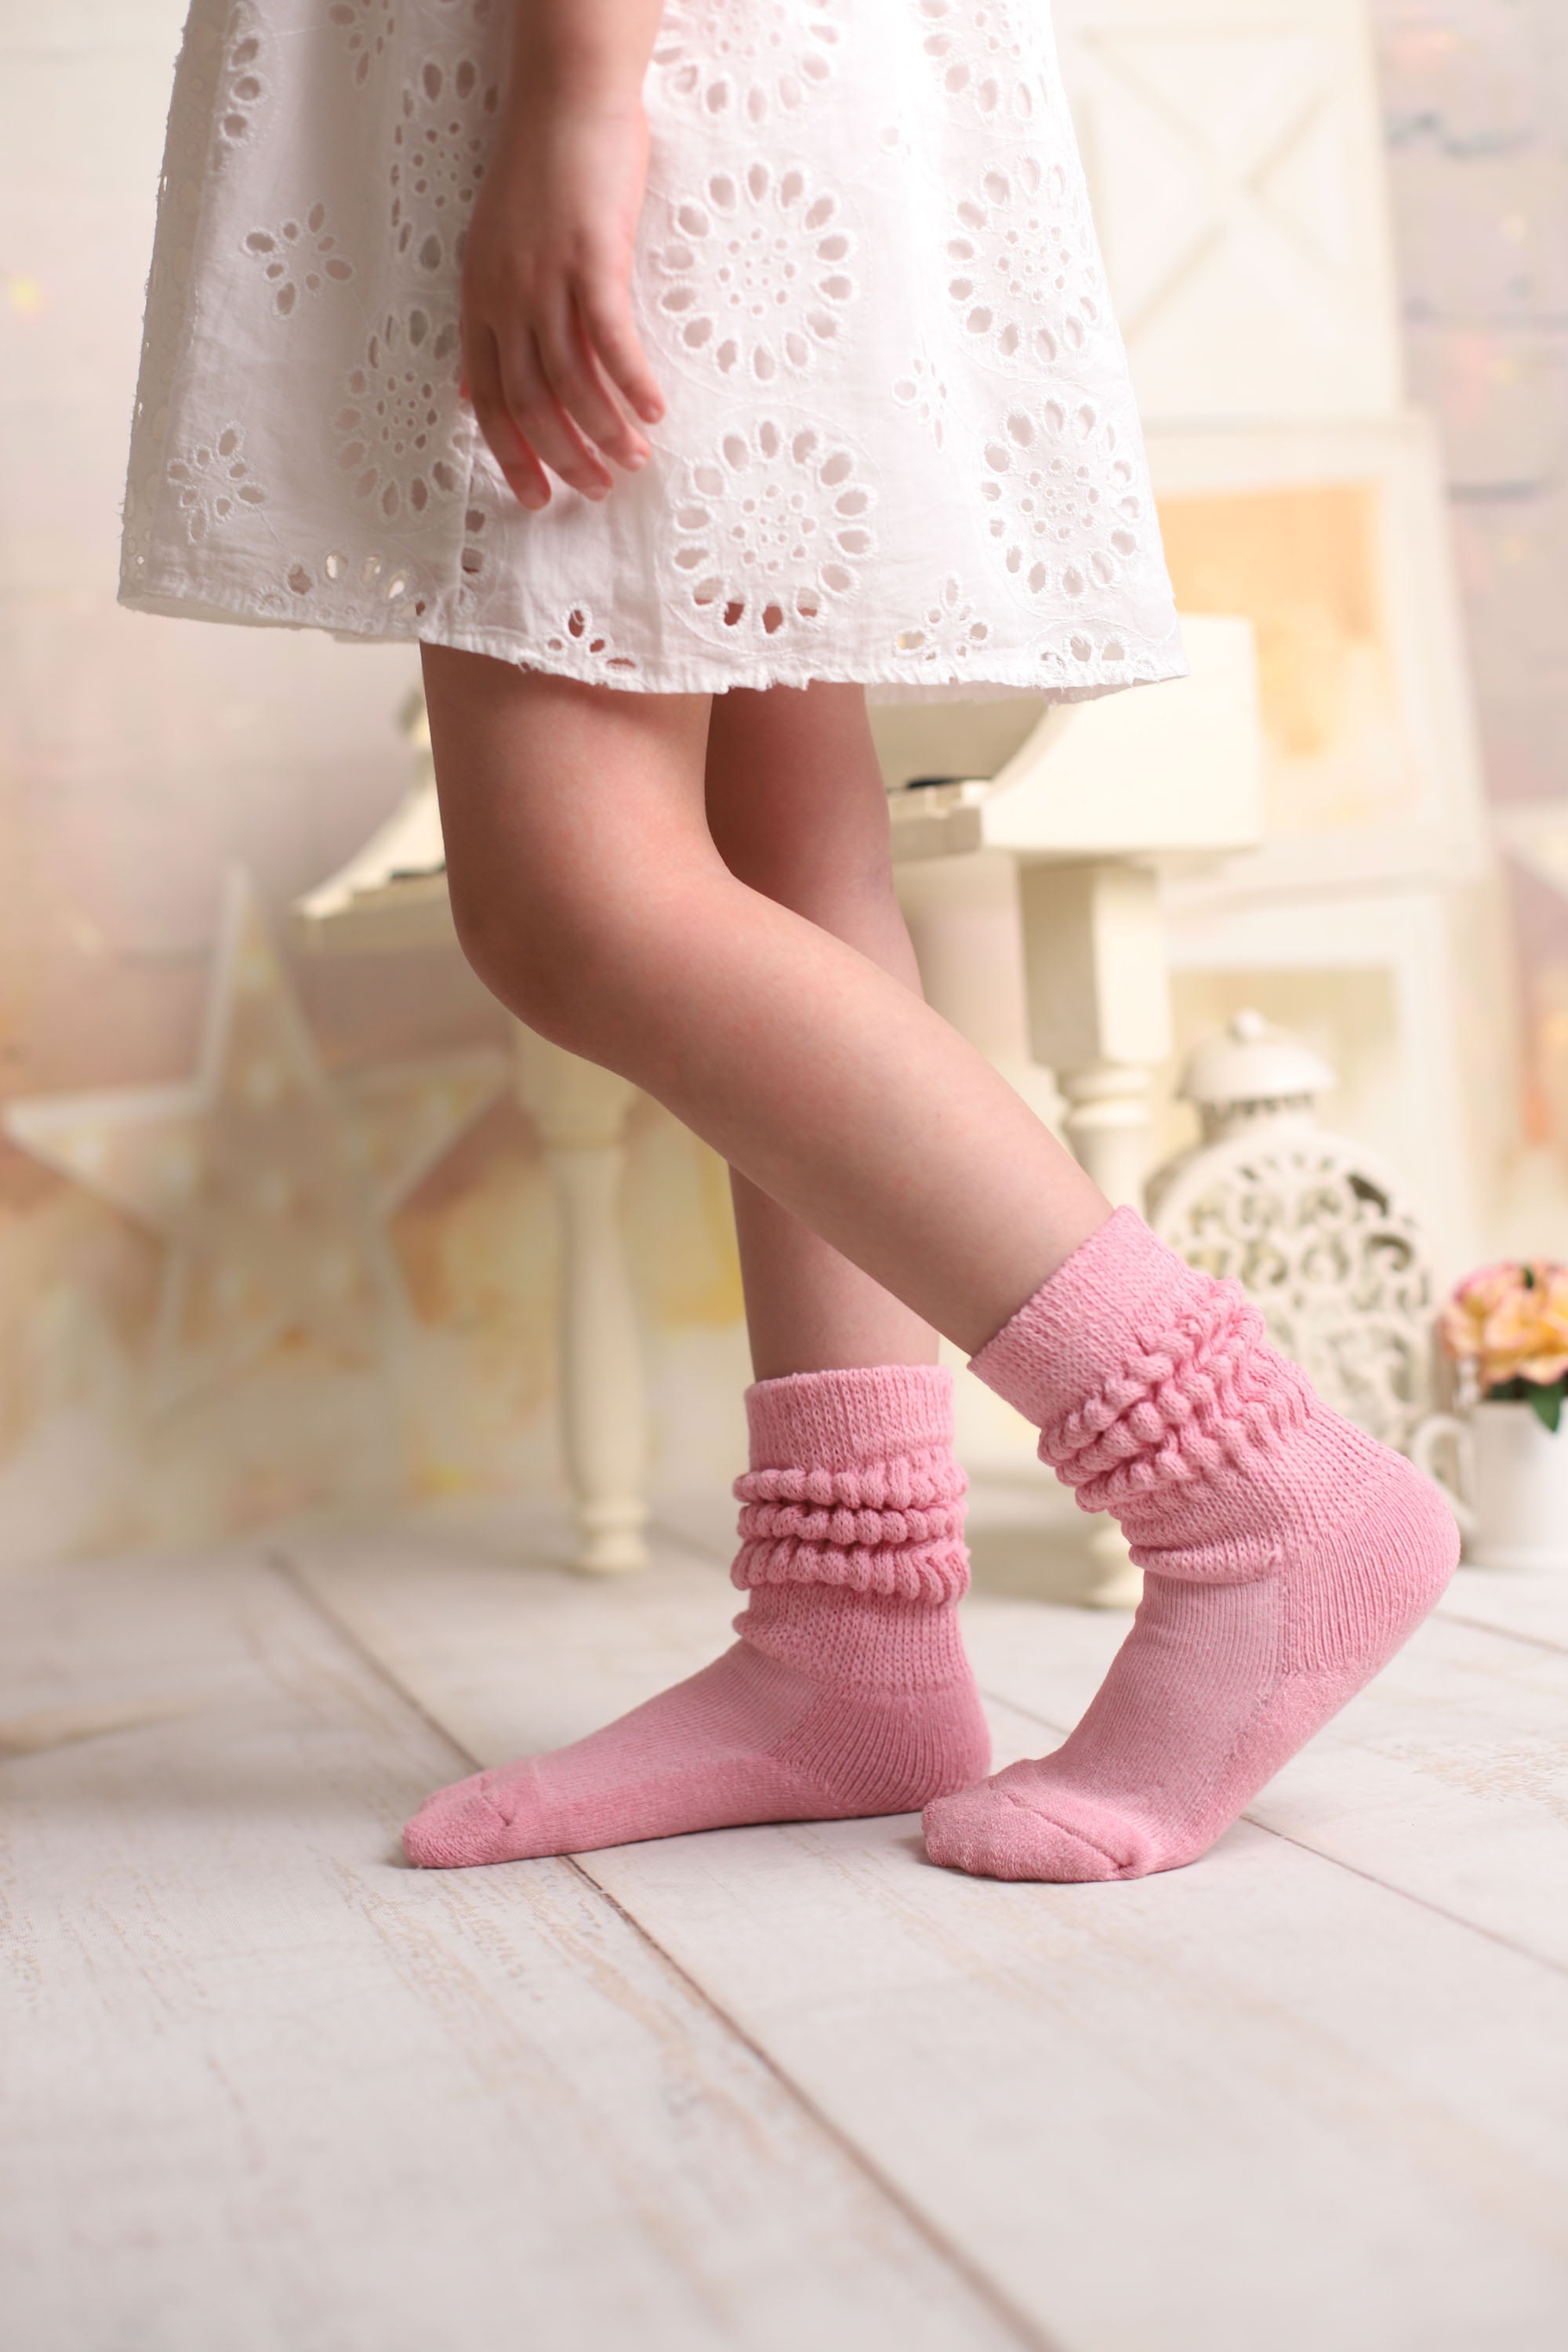 Slouch Socks for Kids Cotton Long and Heavy Pink 1 Pair 3-5 Years Old